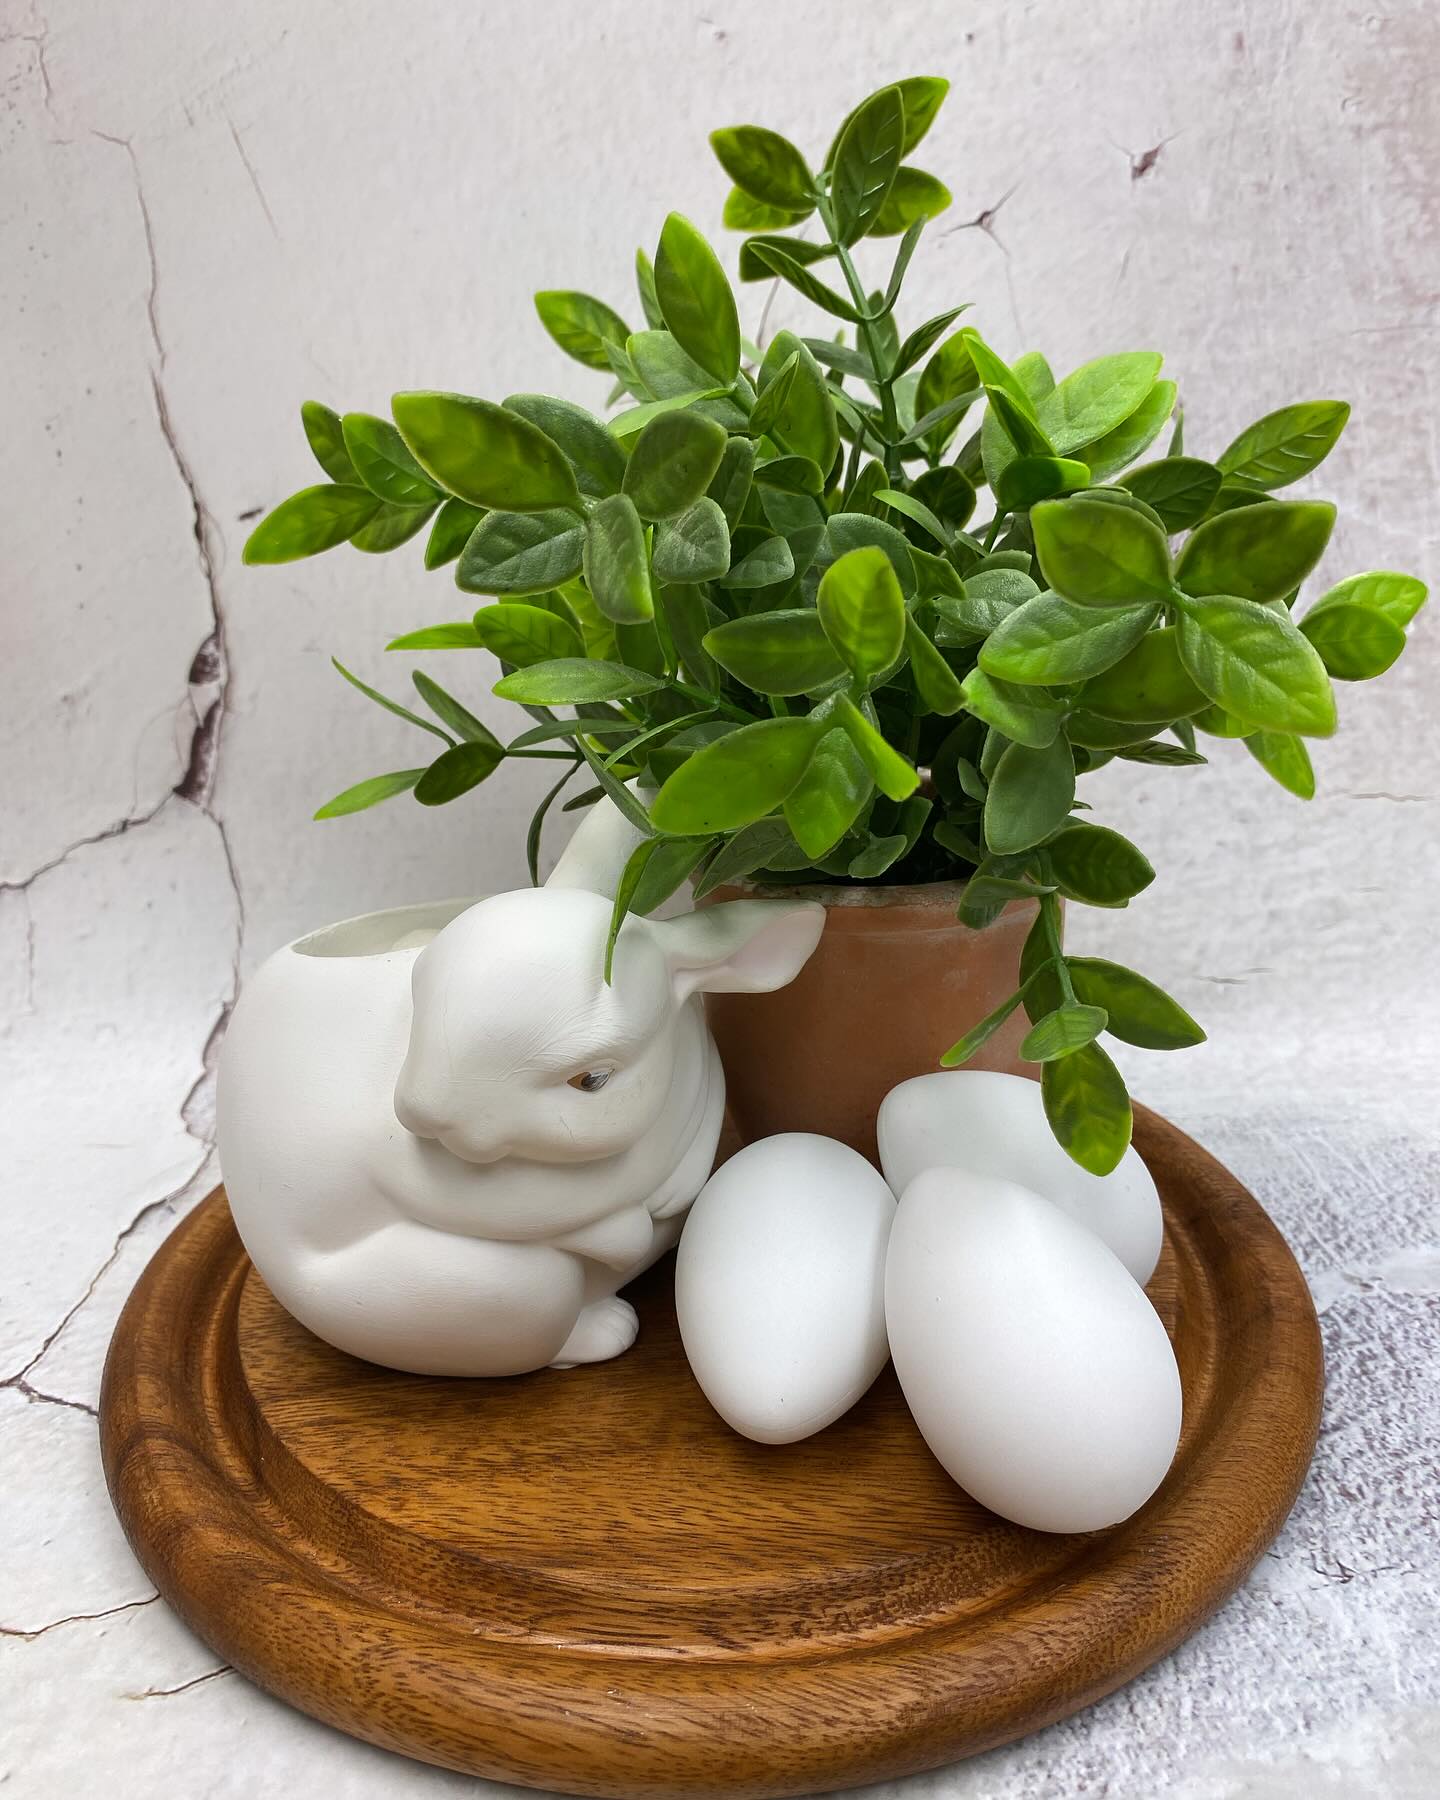 Creations by V : Embrace Easter with Charming Home Decor Ideas!